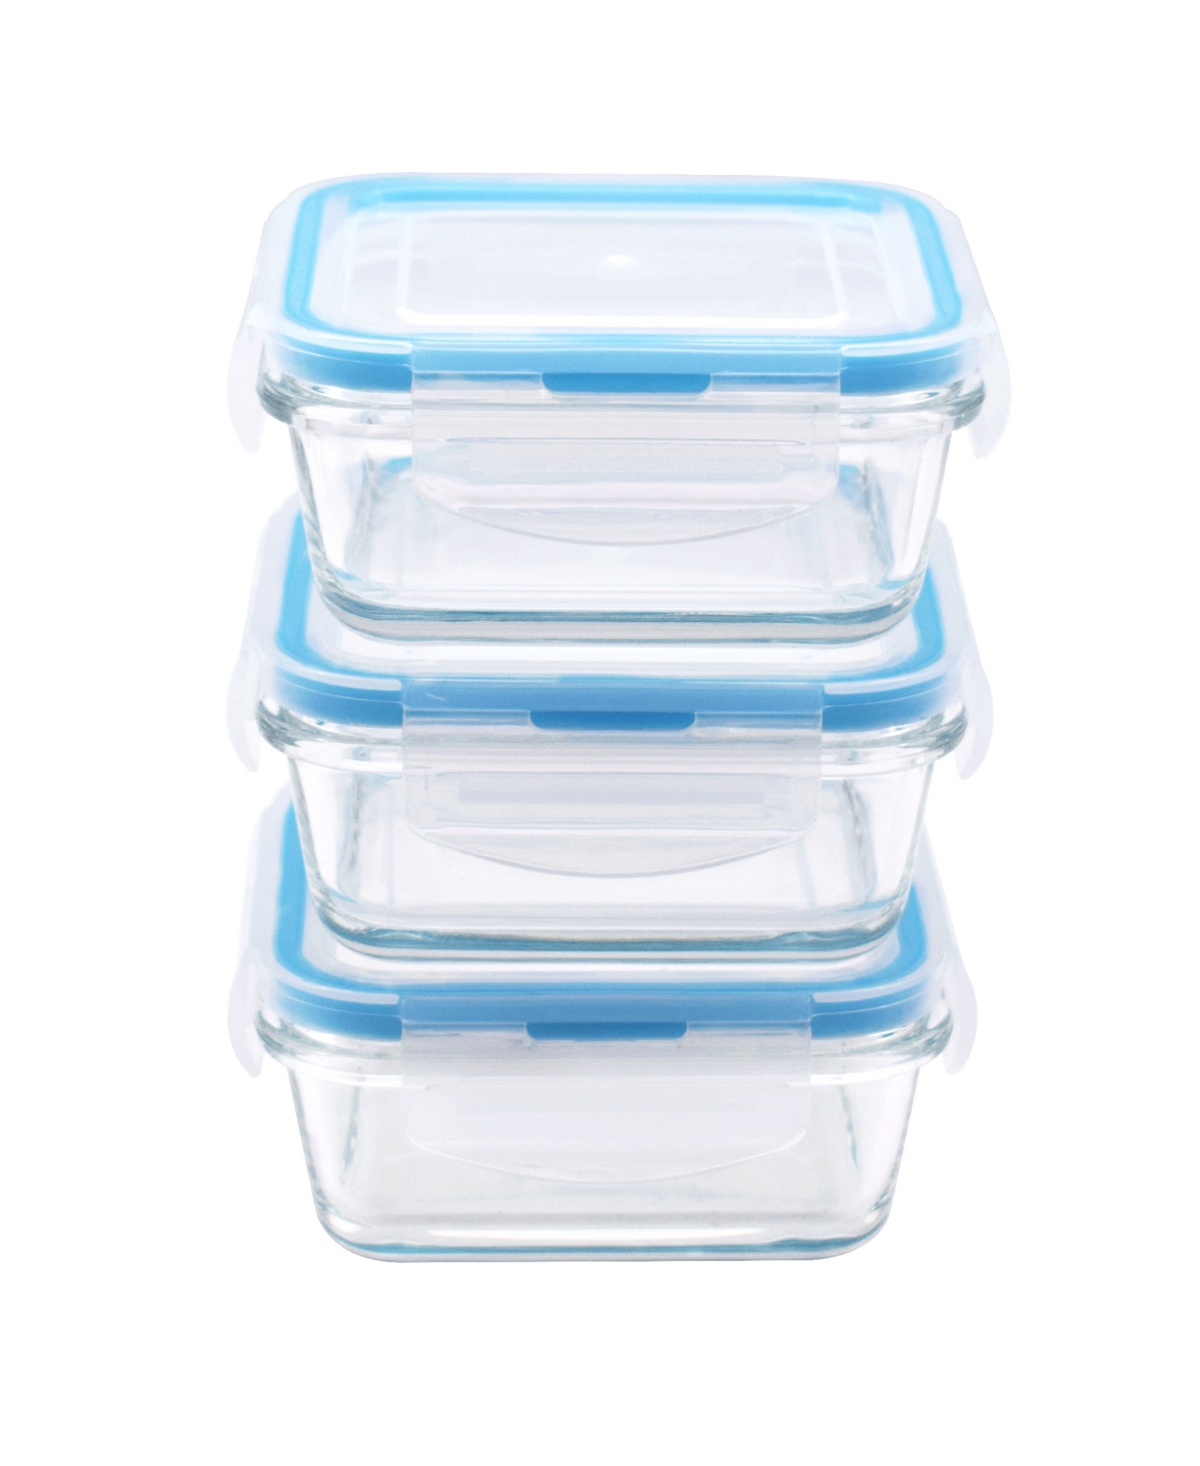 Art & Cook 3 Piece Square 340 ml Food Storage With Locking Lid Set In Blue